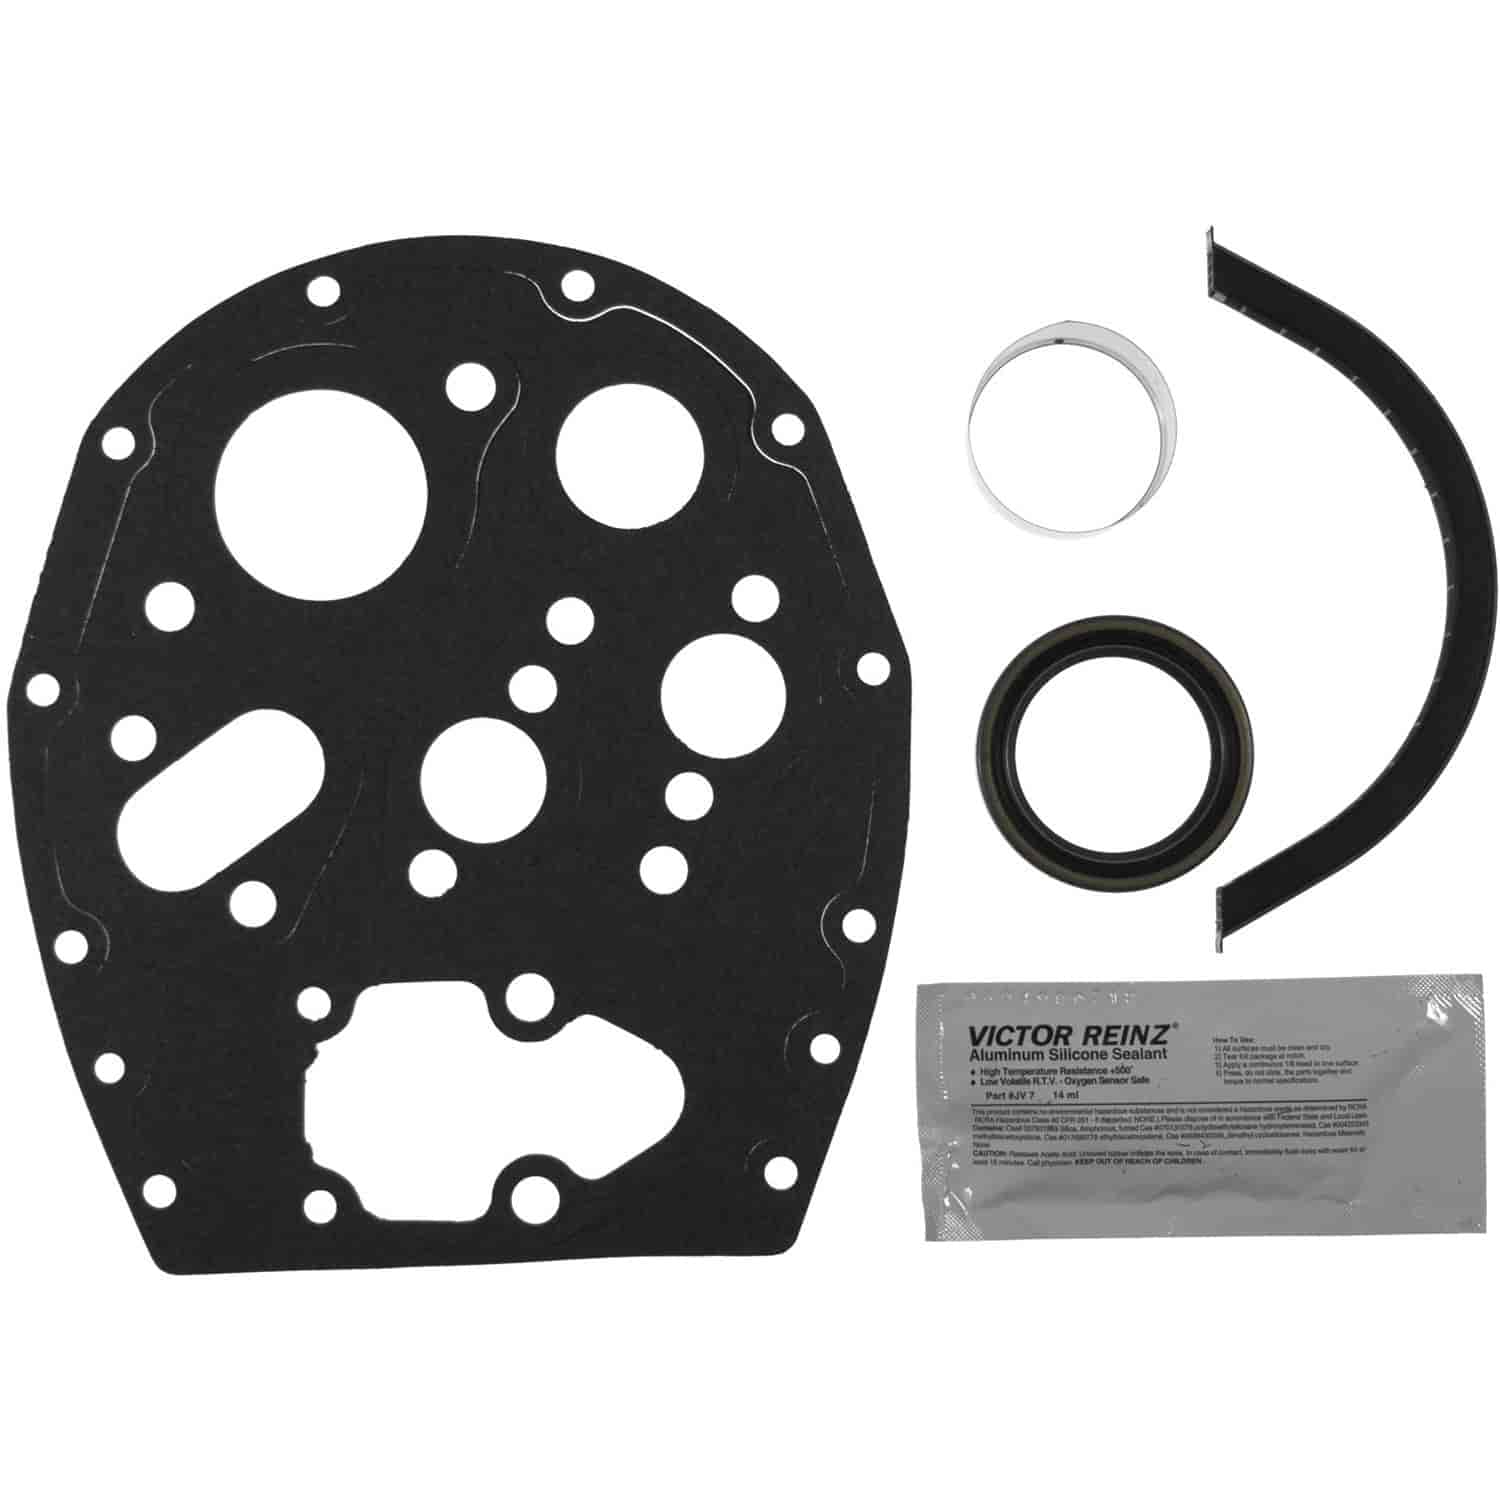 Timing Cover Gasket Set 1975-1986 Small Block Chevy